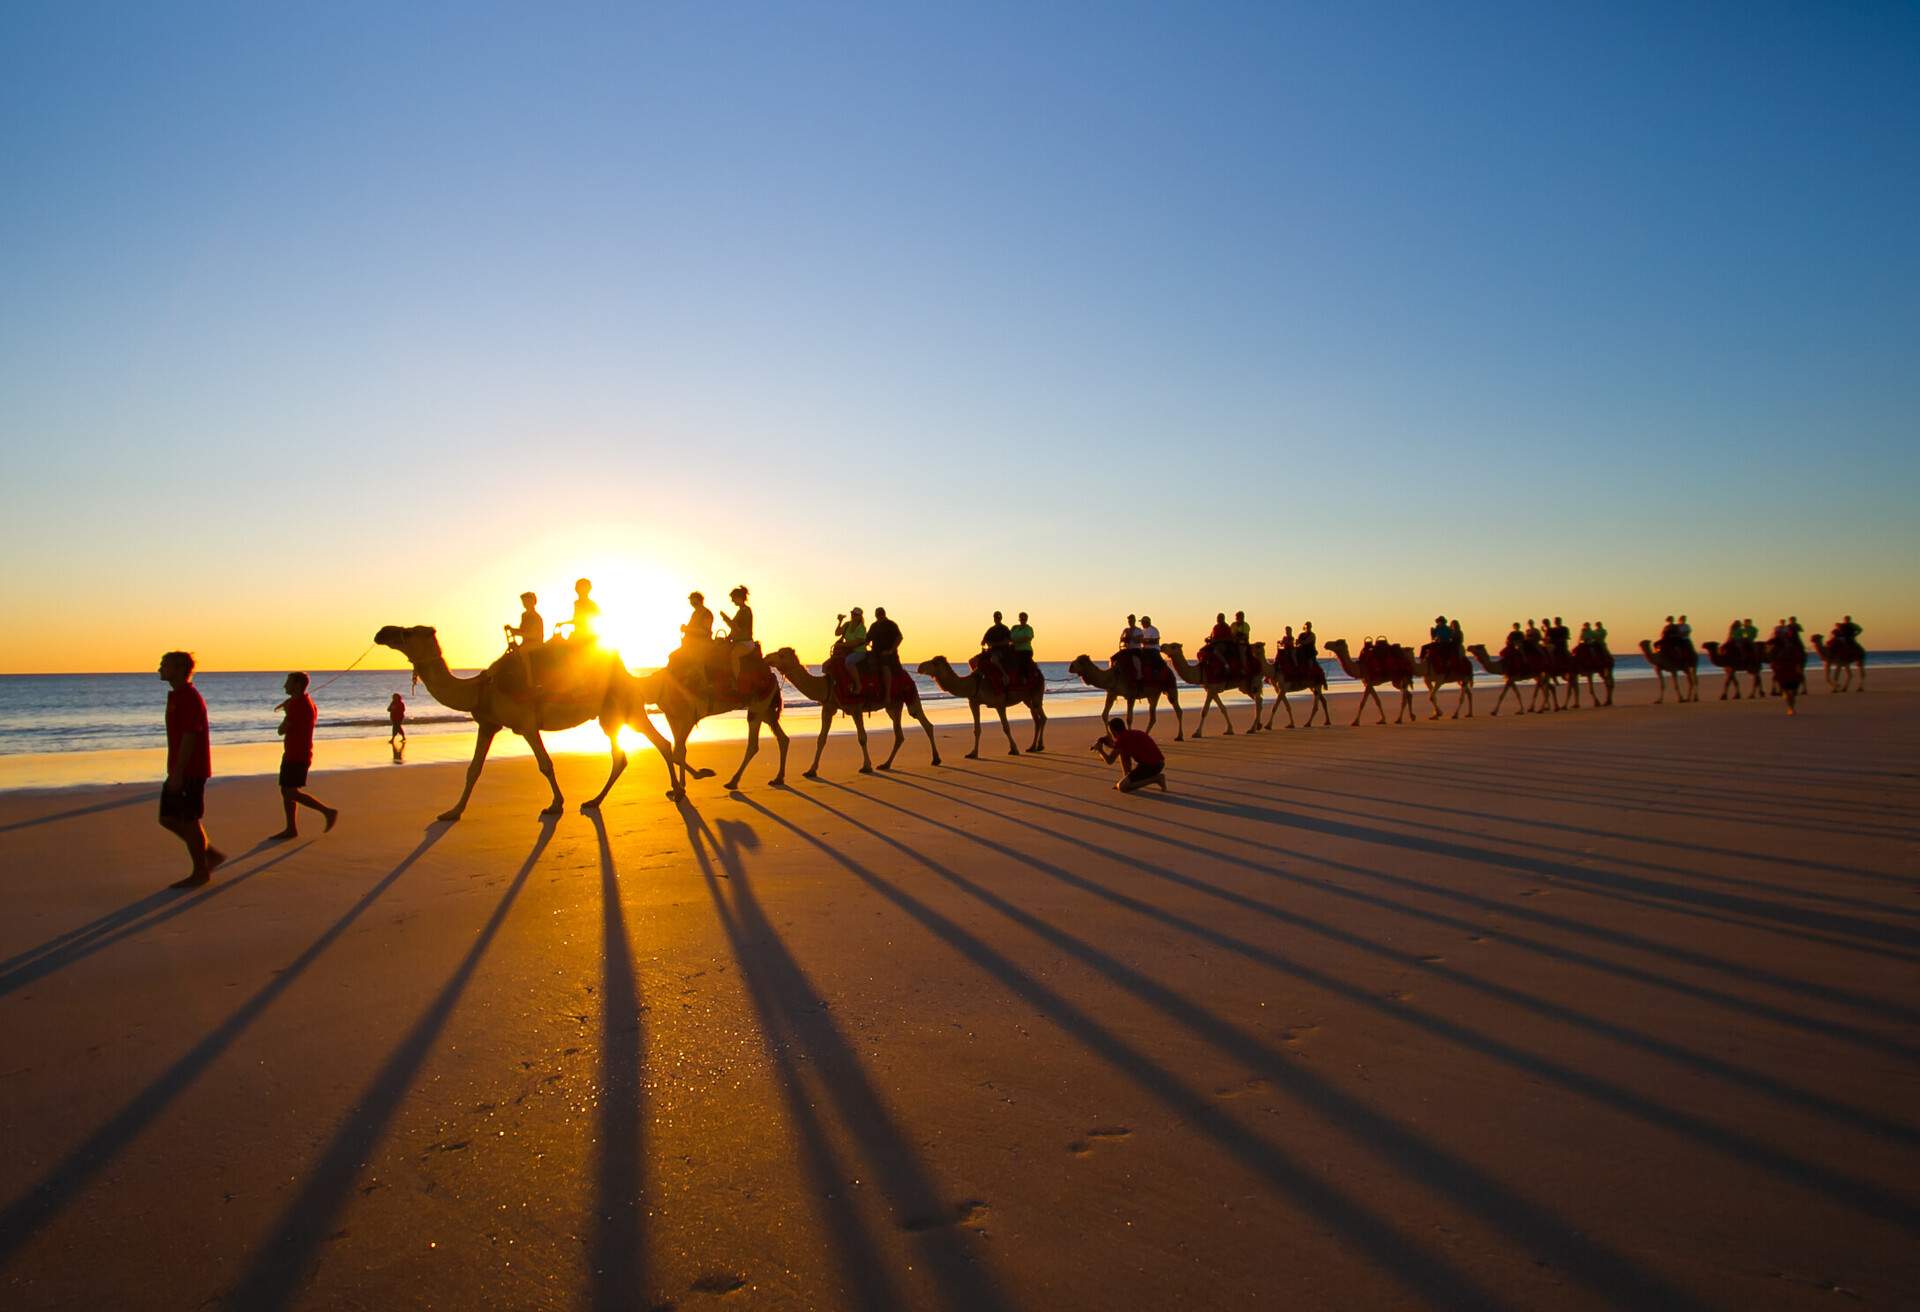 Silhouette of camels on the shore of the beach at sunrise.